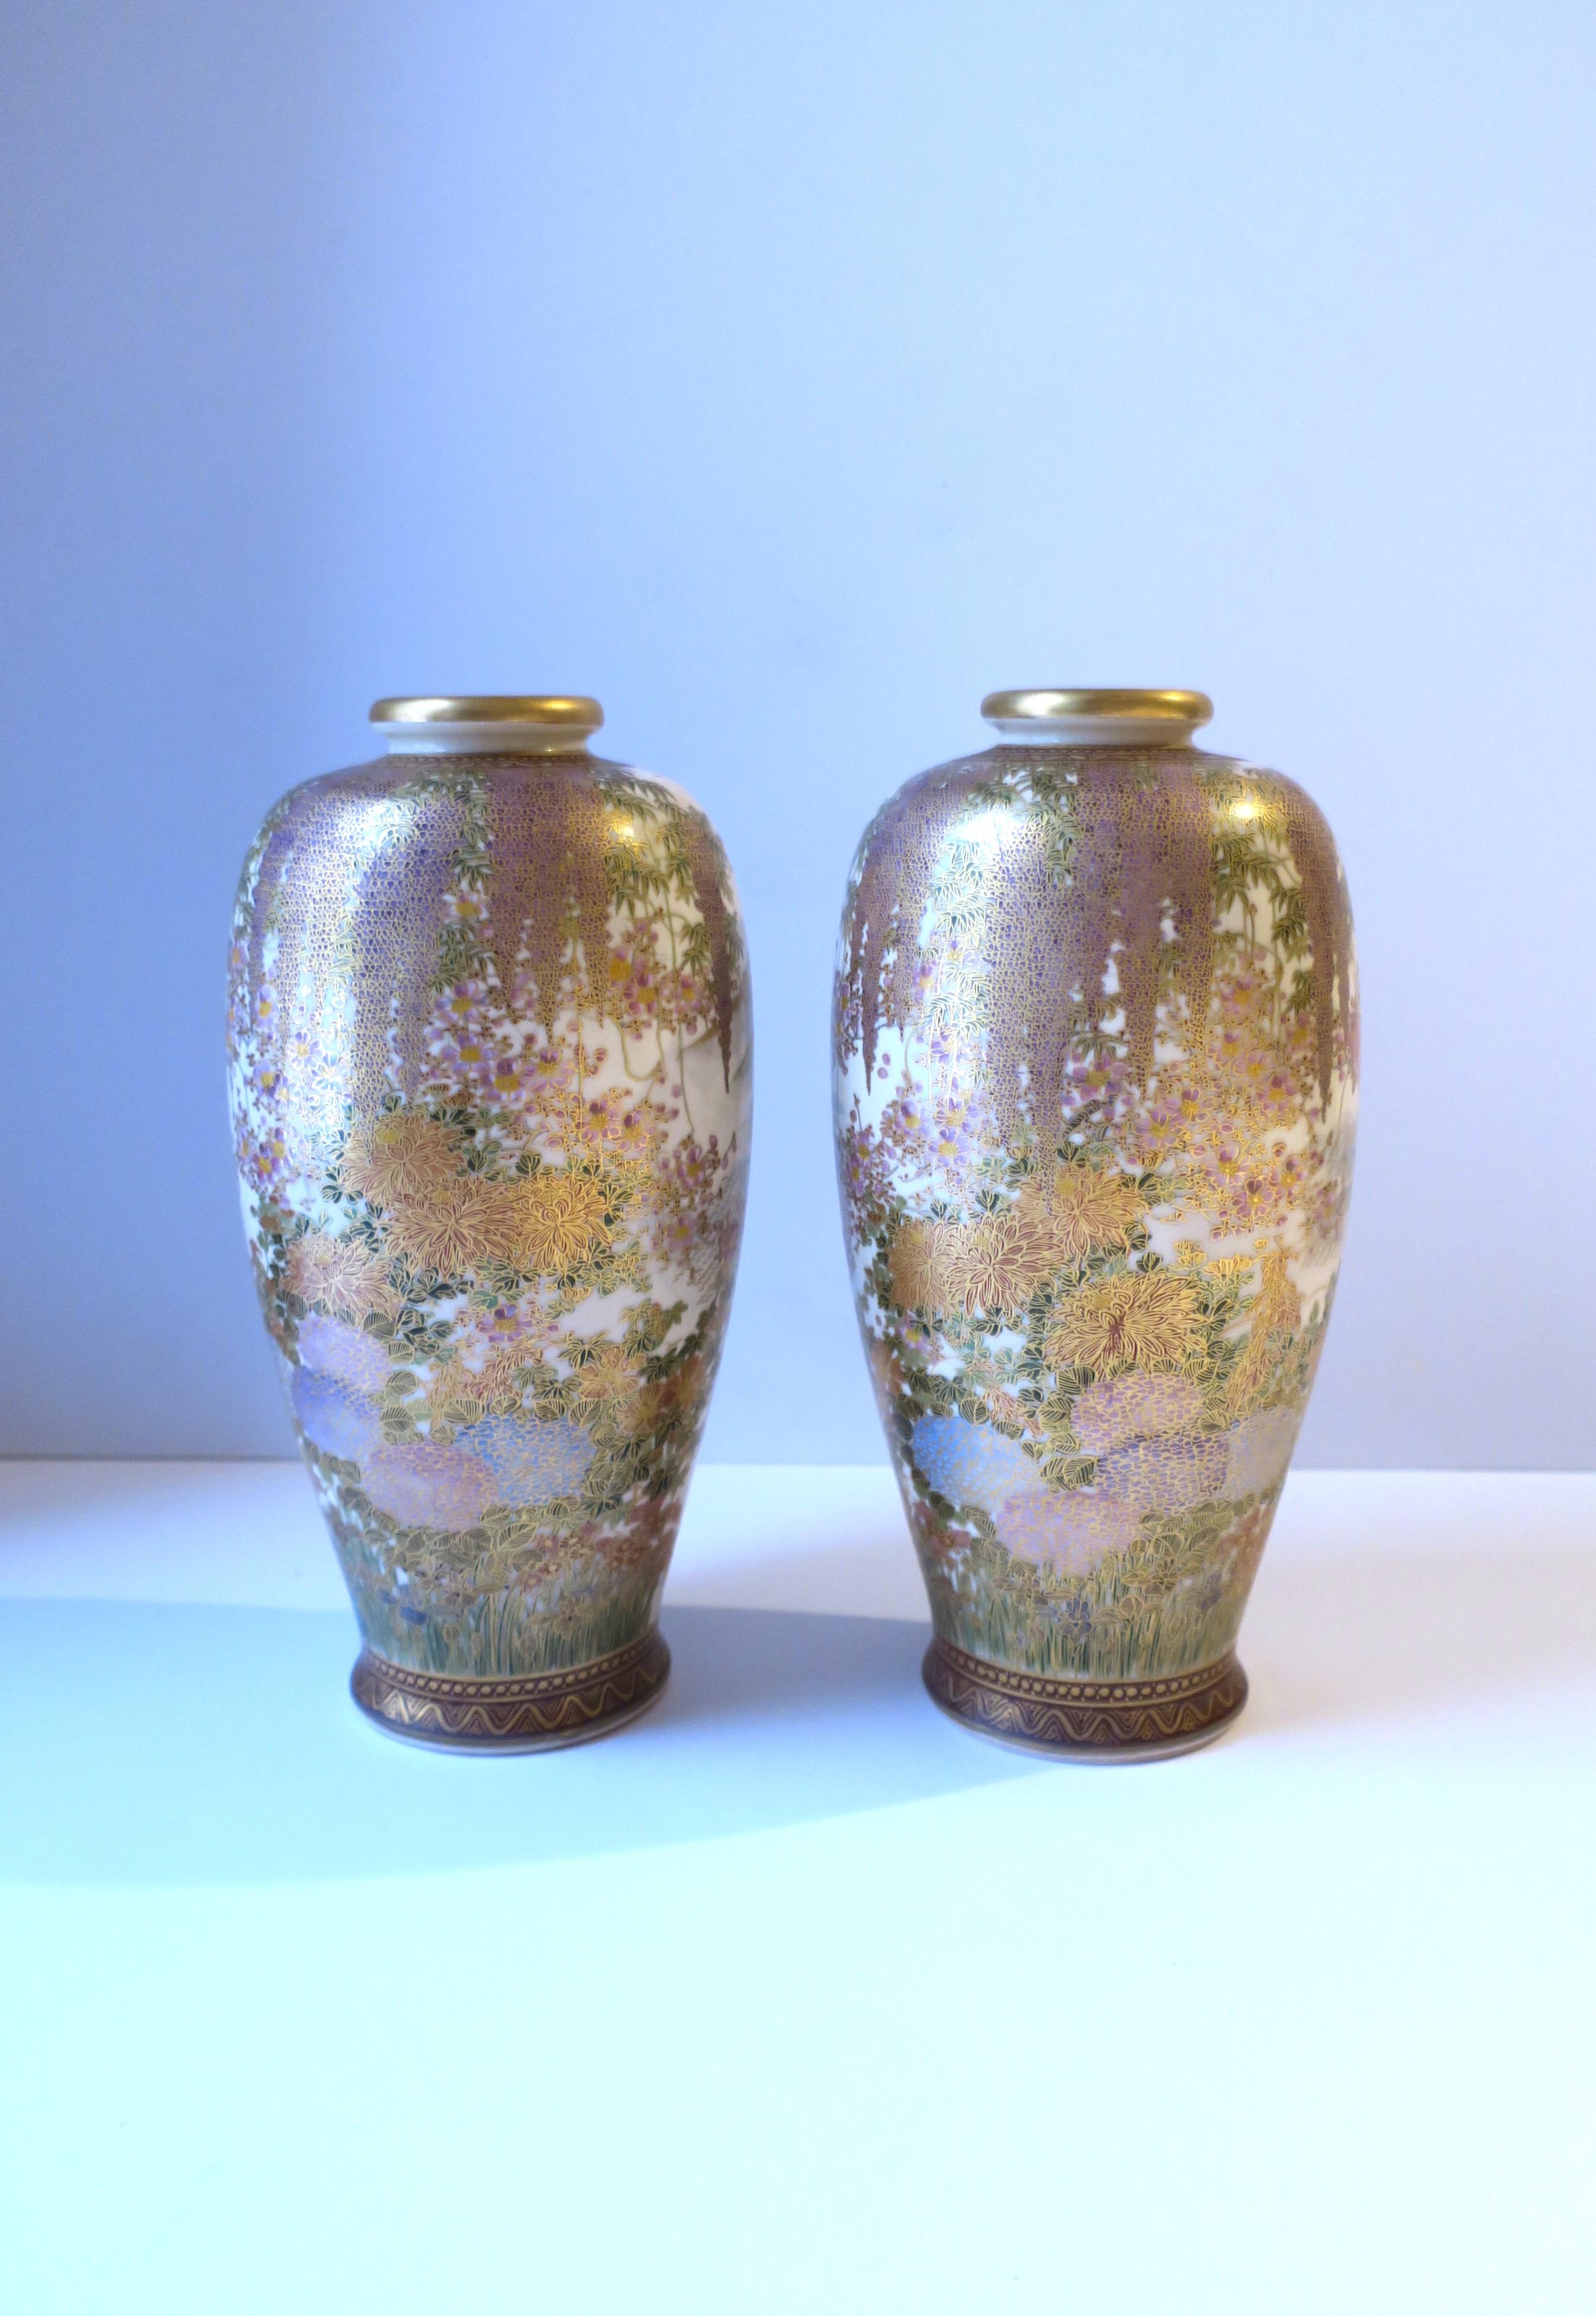 A gorgeous pair of Japanese earthenware Satsuma vases, hand-painted, Meiji period, circa early-20th century, Japan. Vases' beautiful decoration is high-quality and extremely detailed as shown. Color hues include gold gilt, pinks, purples, blues,